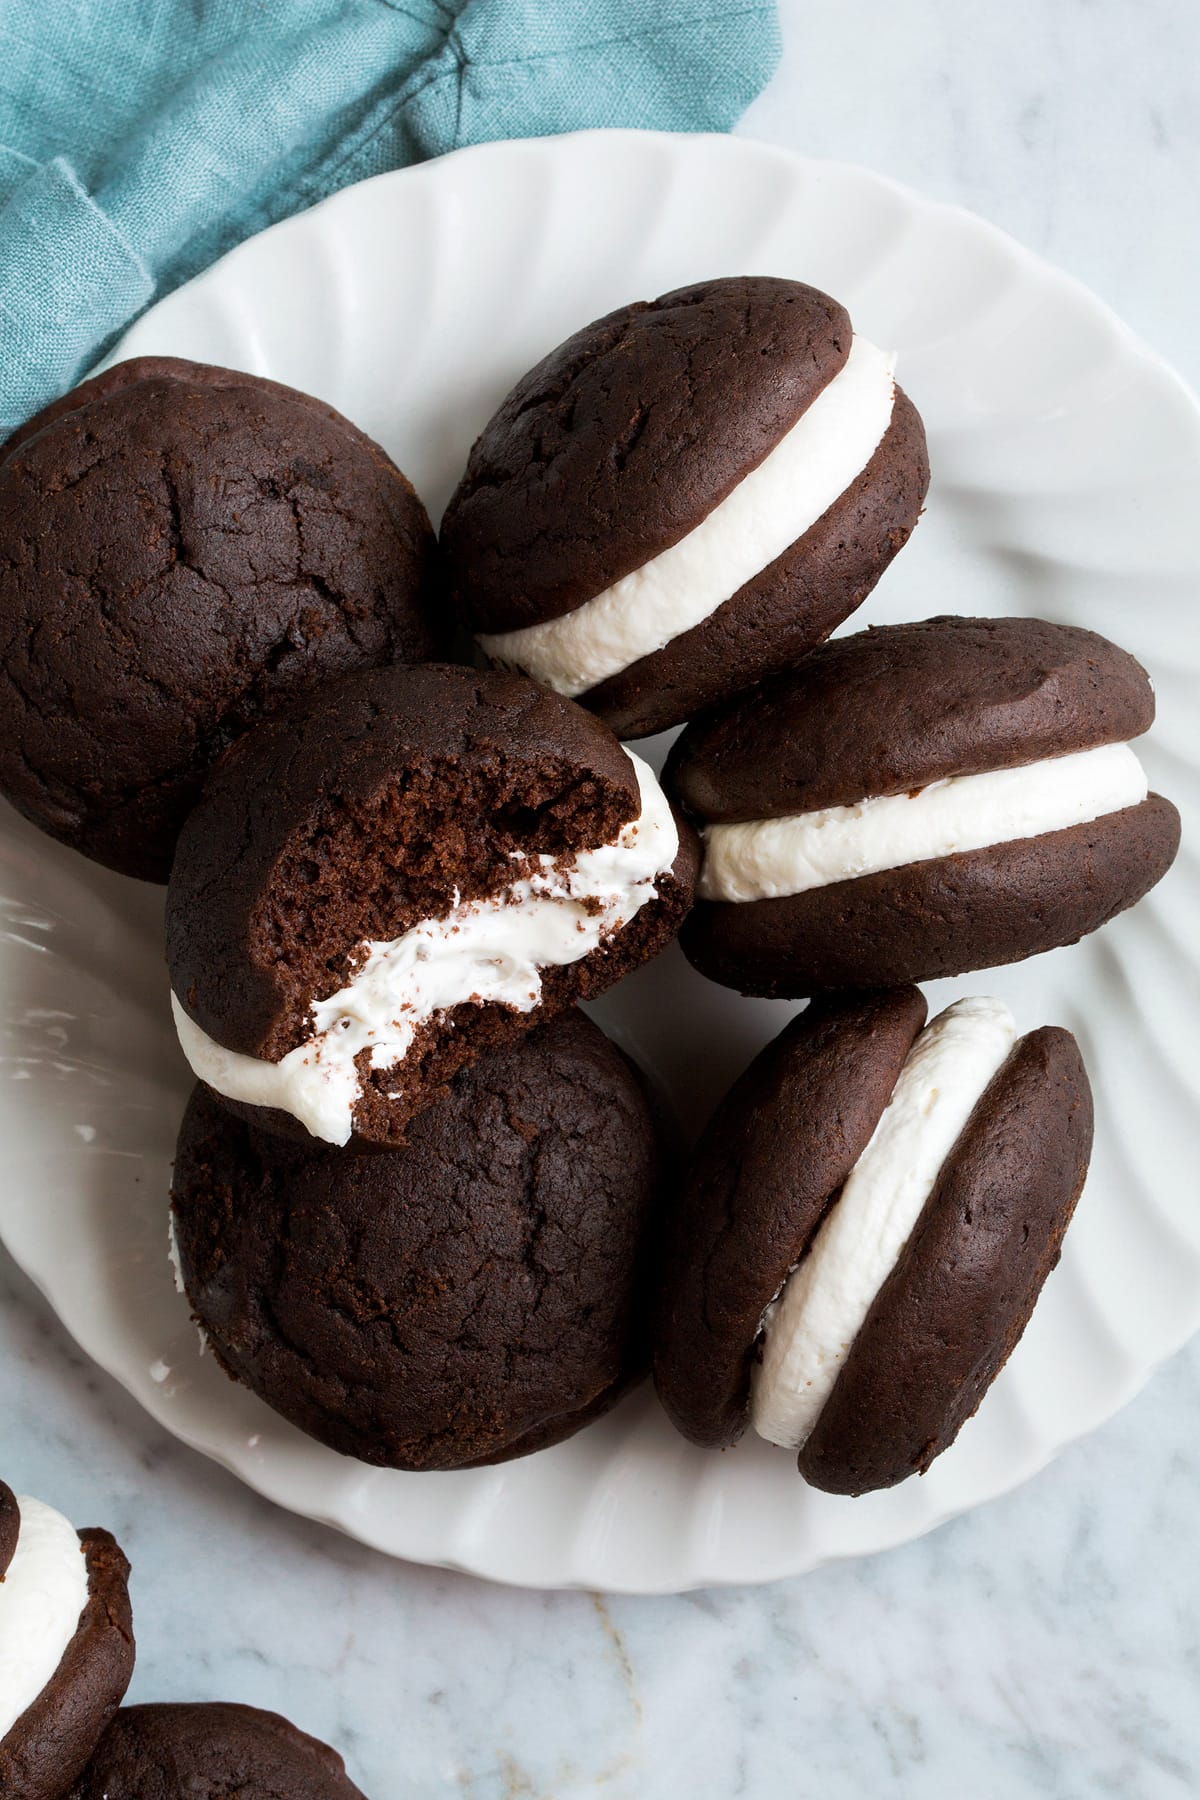 Overhead image of chocolate Whoopie Pies with one broken in half to show texture.